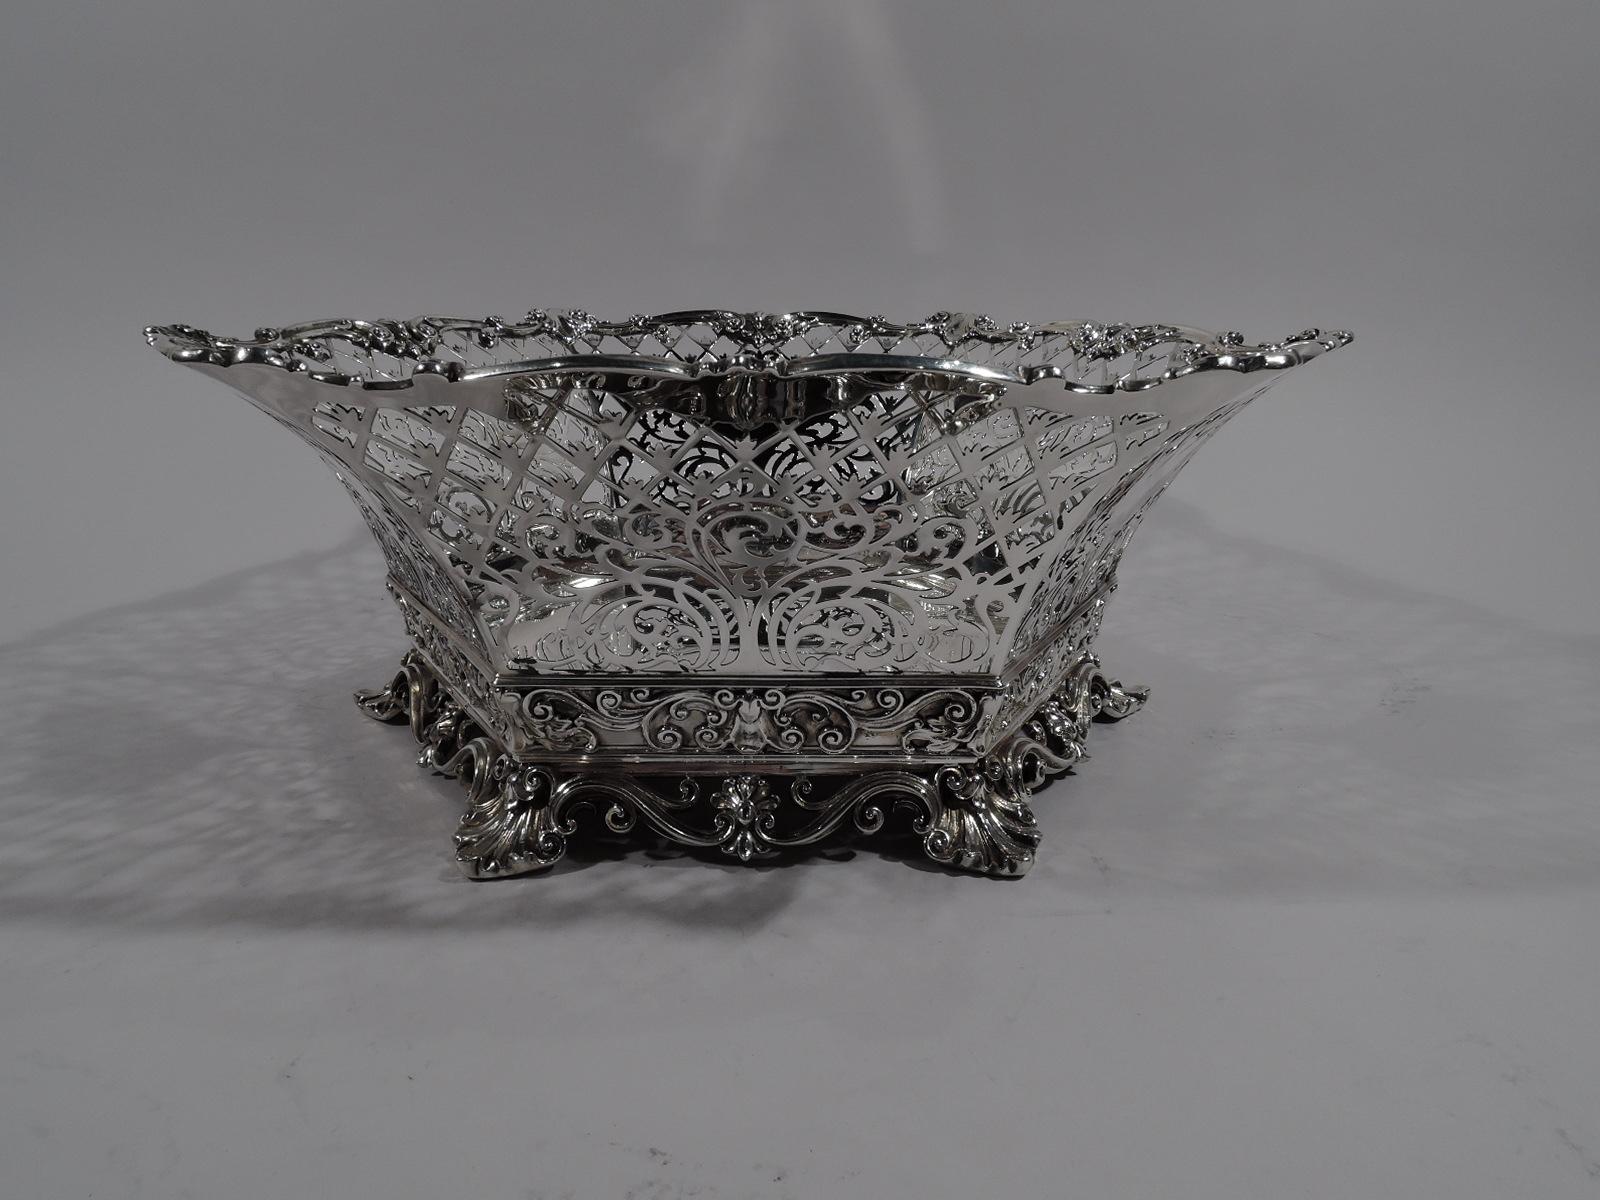 Edwardian sterling silver centerpiece basket bowl, 1898. Solid hexagonal well and tapering open trellis sides with fluid scrollwork and solid shaped cartouches (vacant). Sides have applied scrolls, leaves, and leaves. Solid border at bottom with